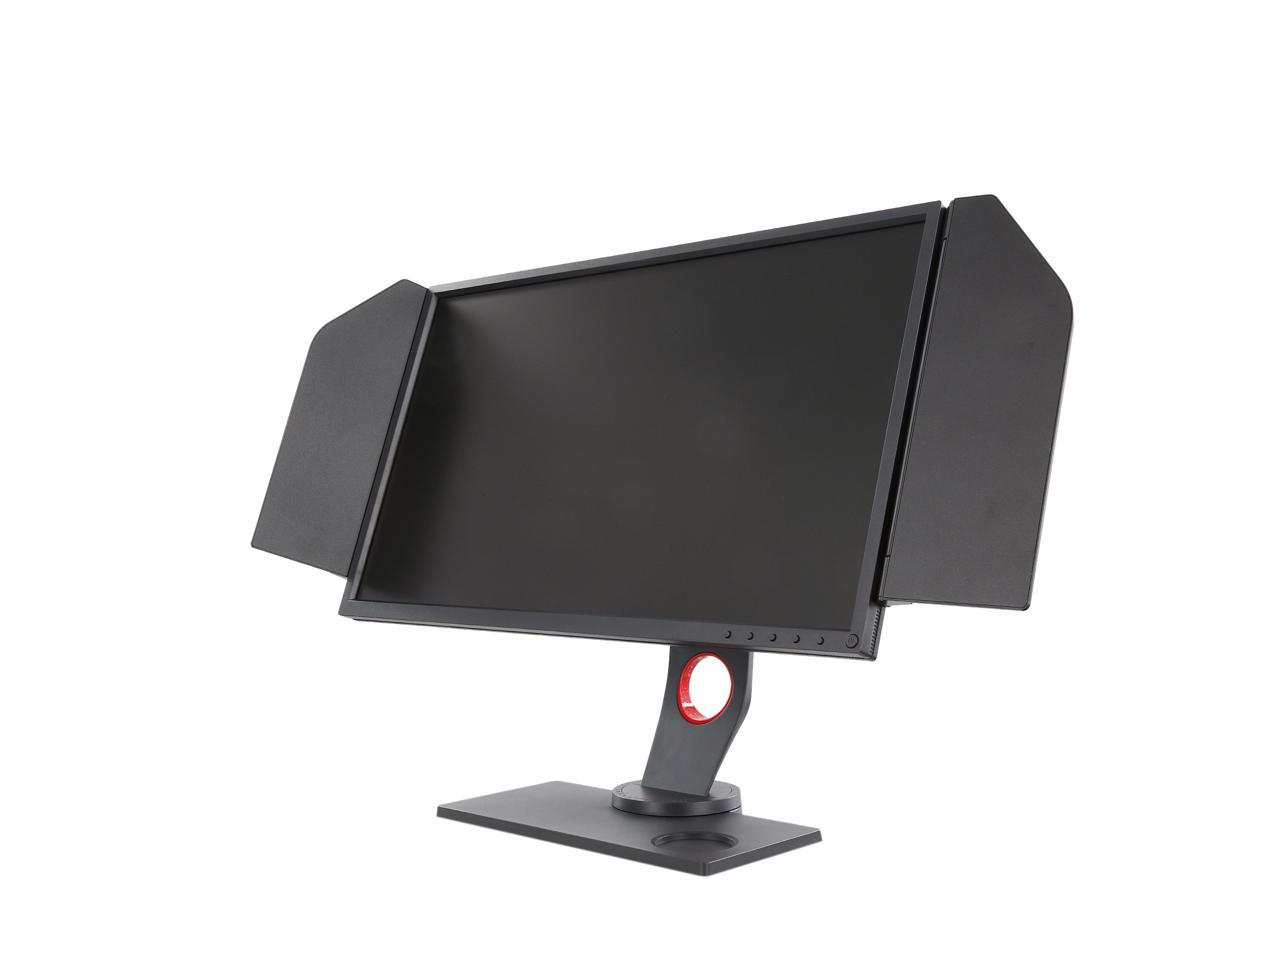 Benq Zowie Xl2546 25 Actaul Size 24 5 1080p 1ms Gtg 240hz Esports Gaming Monitor Dyac S Switch Shield Black Equalizer Color Vibrance Height Adjustable Vesa Ready Newegg Com